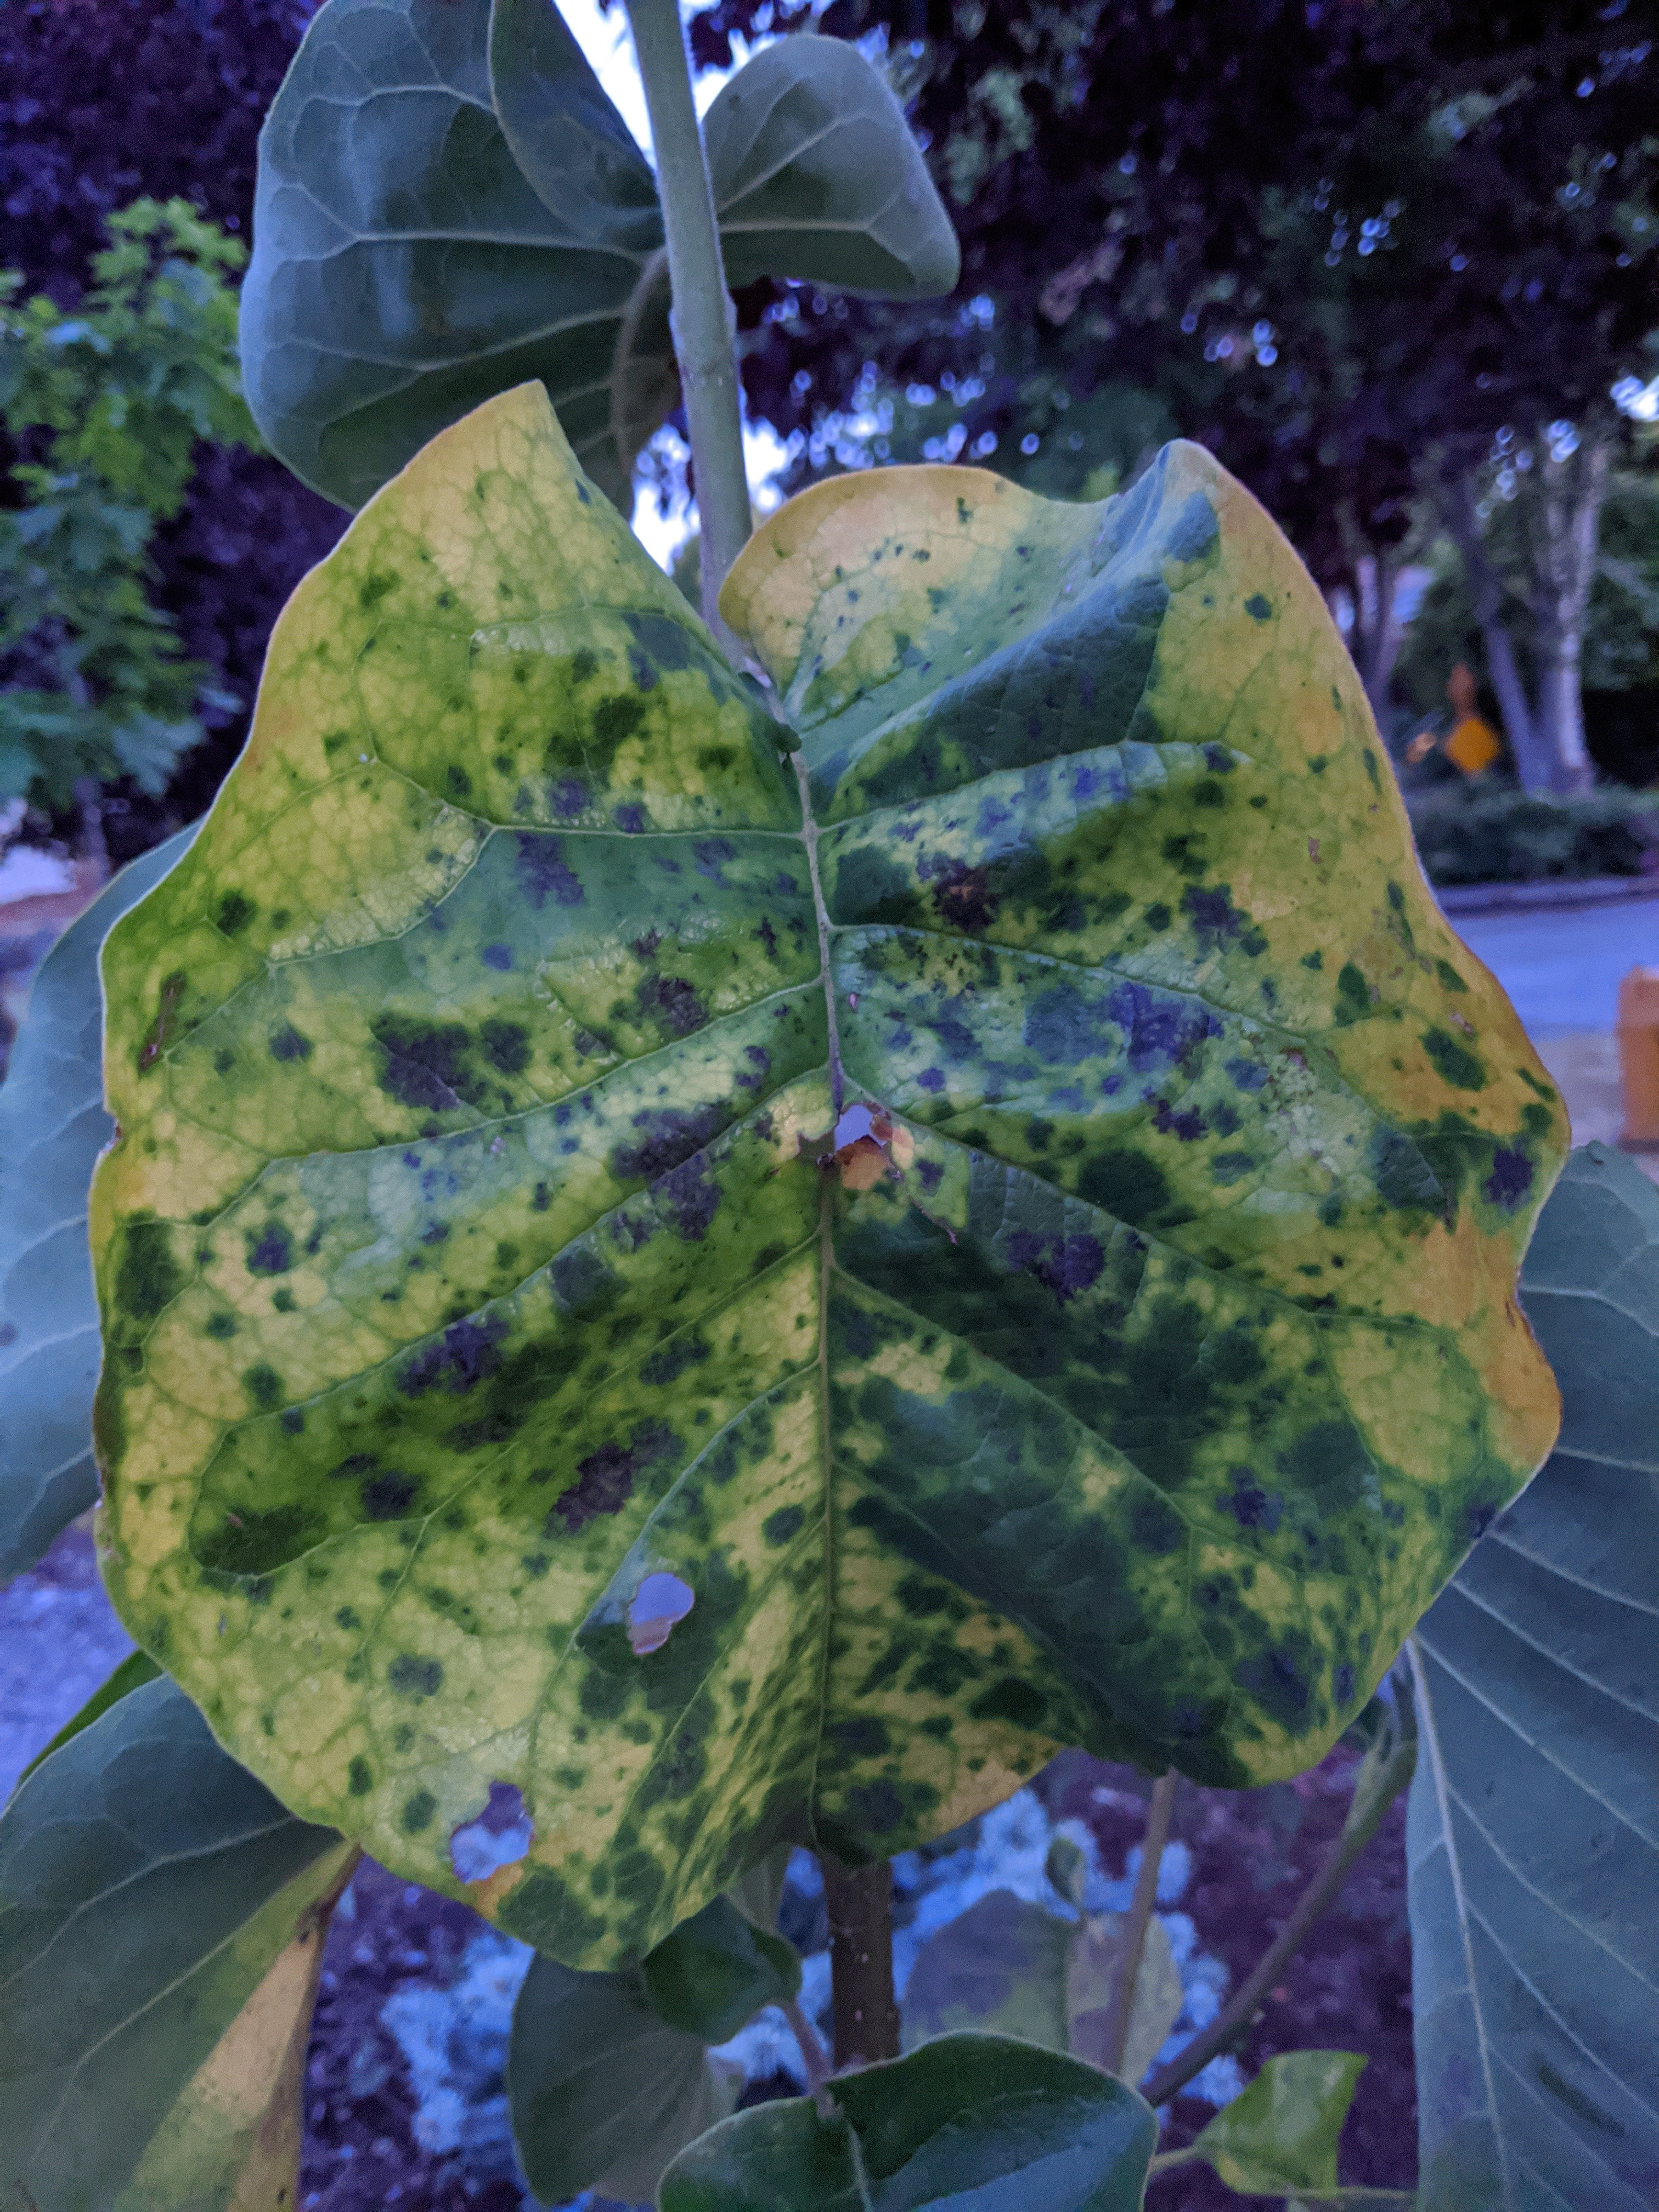 Magnolia Tree Leaves Turning Yellow With Black Spots